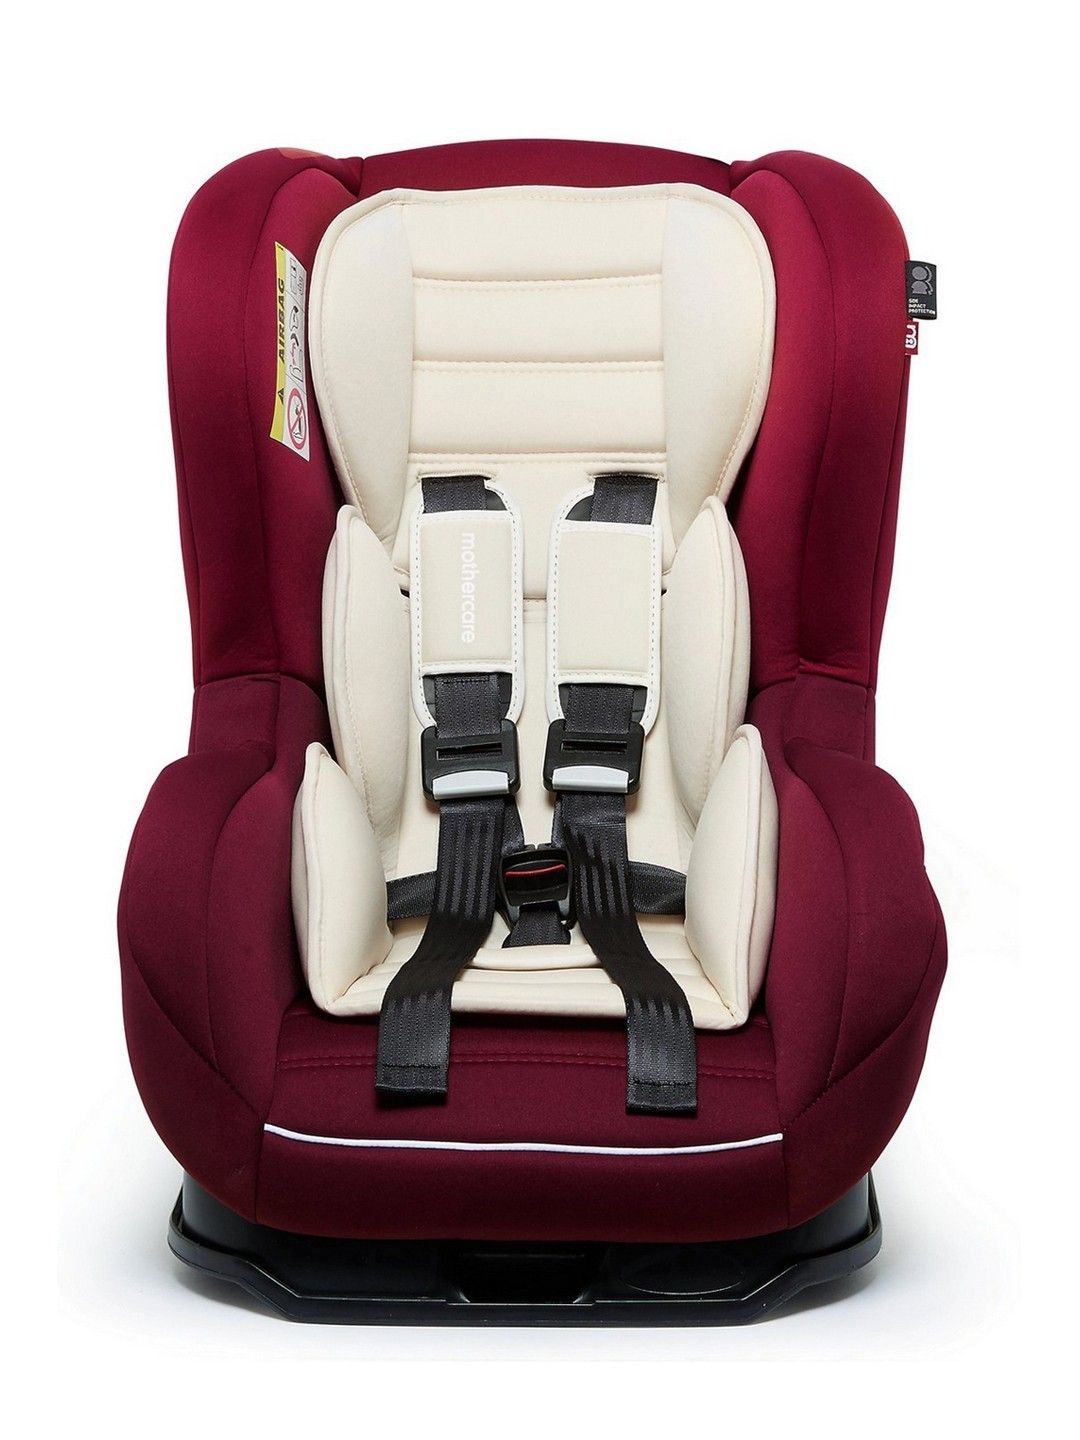 Madrid Combination Car Seat - Red